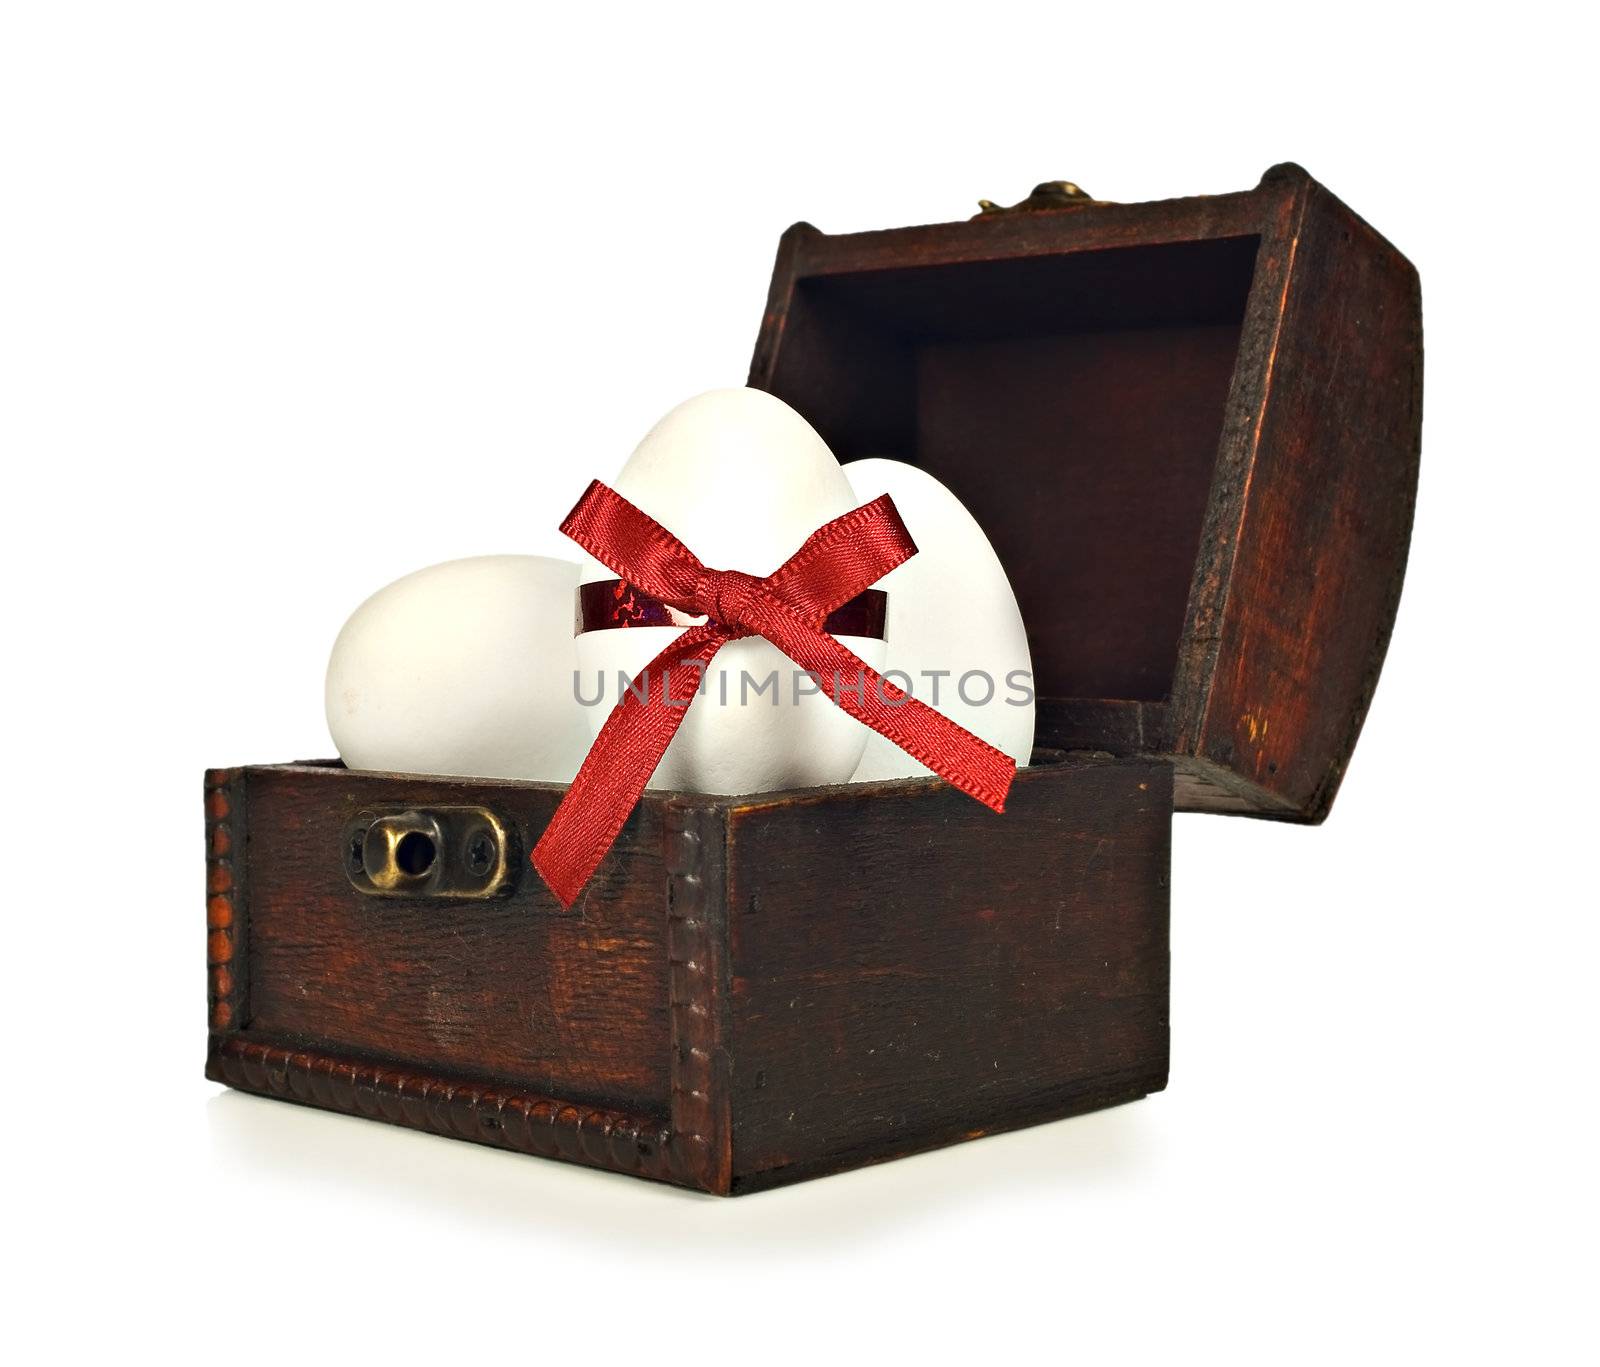 White candy easter eggs in a chest by tish1